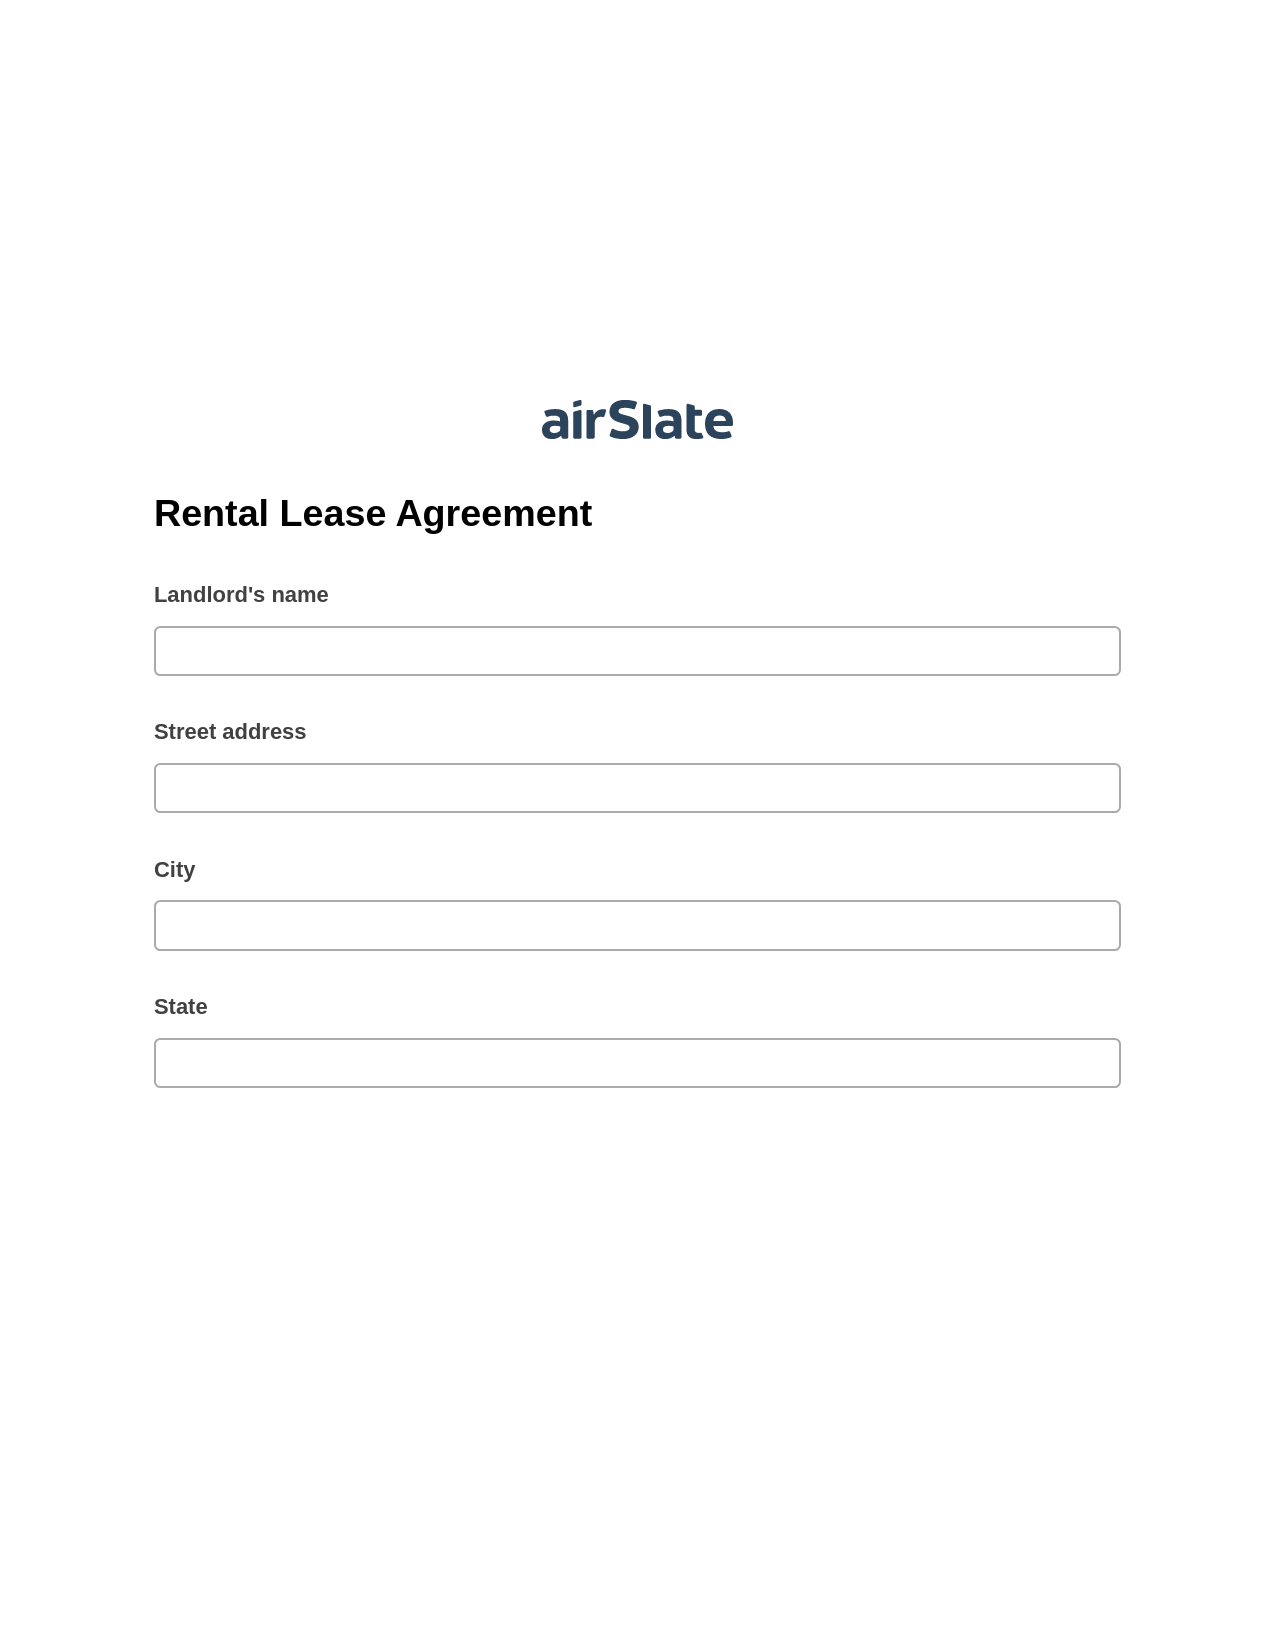 Rental Lease Agreement Pre-fill from Excel Spreadsheet Dropdown Options Bot, Invoke Salesforce Process Bot, Text Message Notification Postfinish Bot